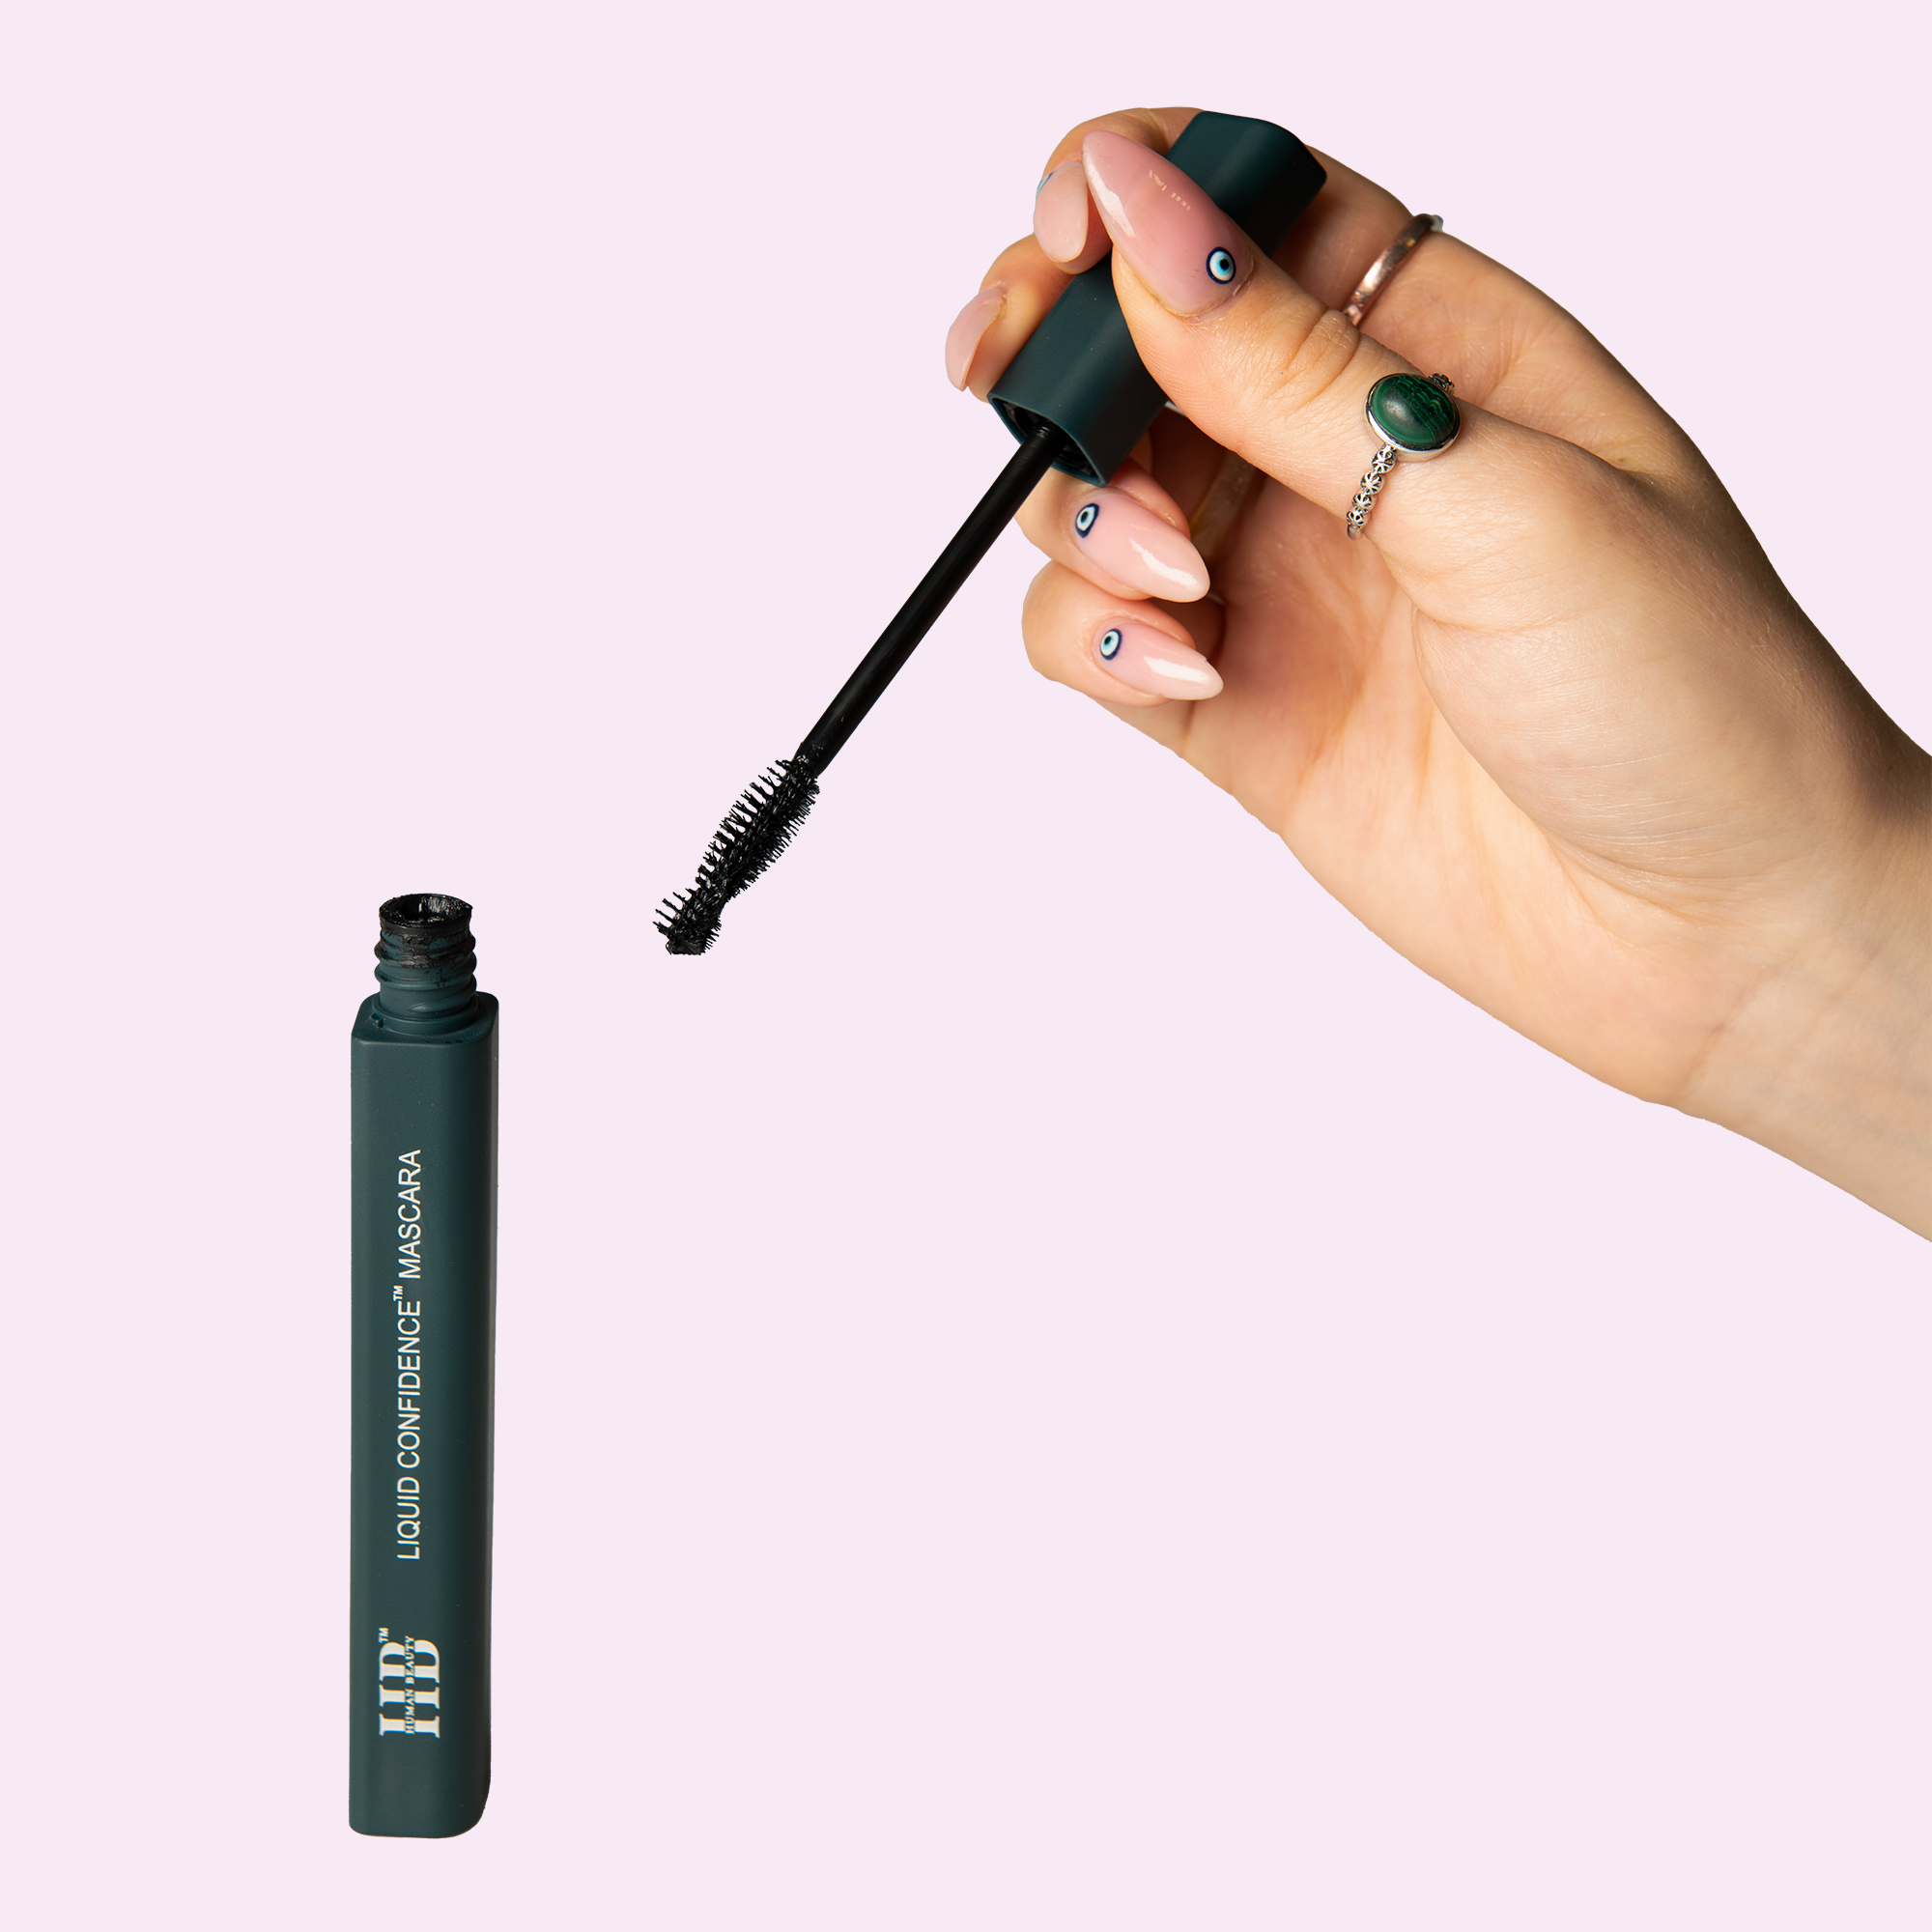 The Liquid Confidence Mascara held open by a hand on a light purple background